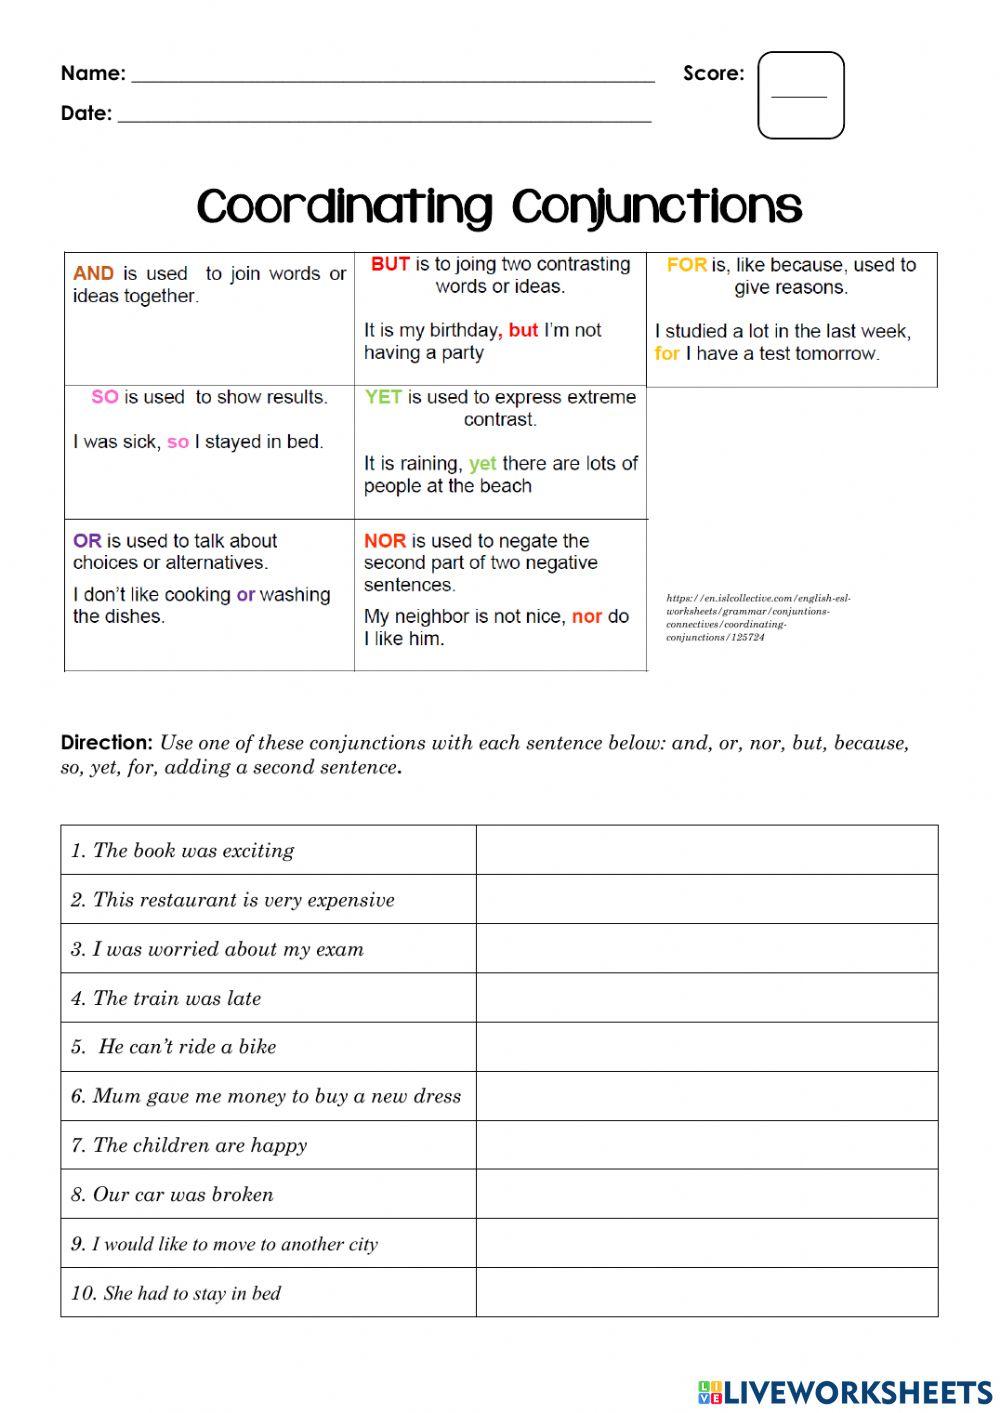 Coordinating Conjunctions and Reading C...